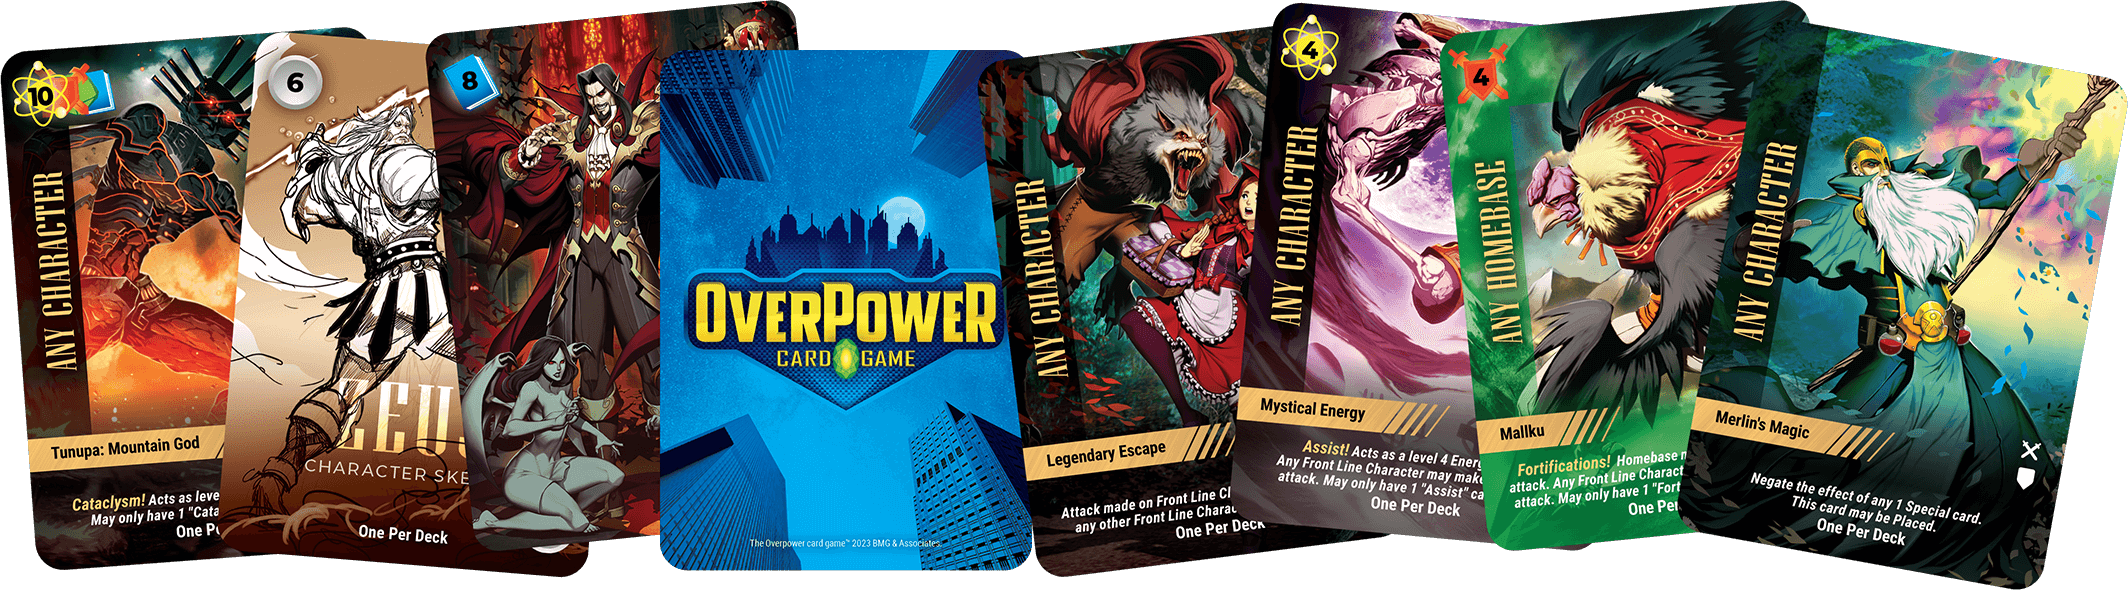 Overpower Cards Banner